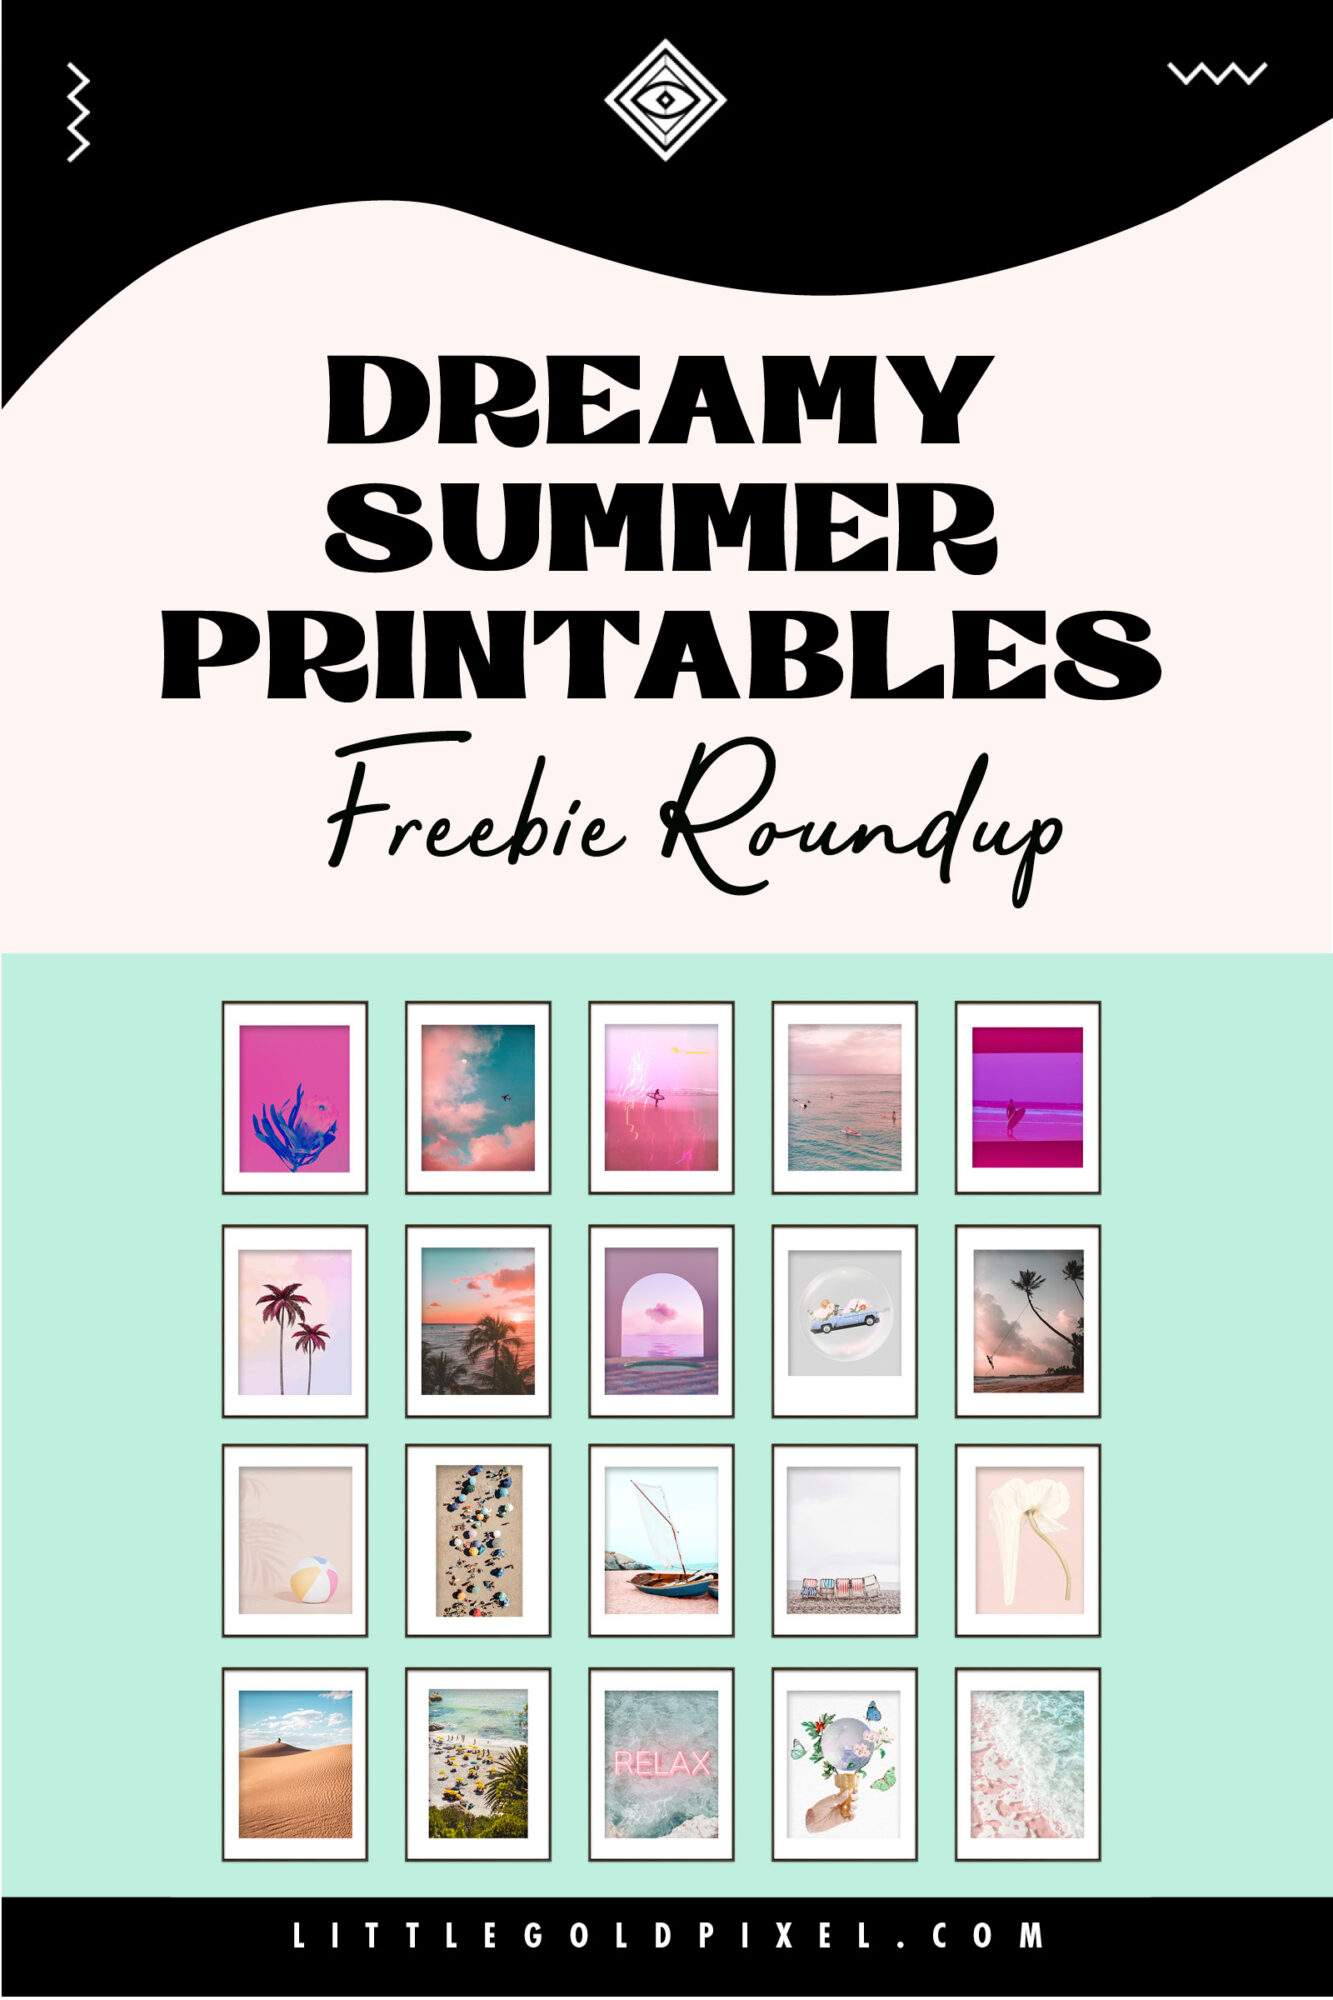 Dreamy Free Summer Art for Your Gallery Walls • Little Gold Pixel